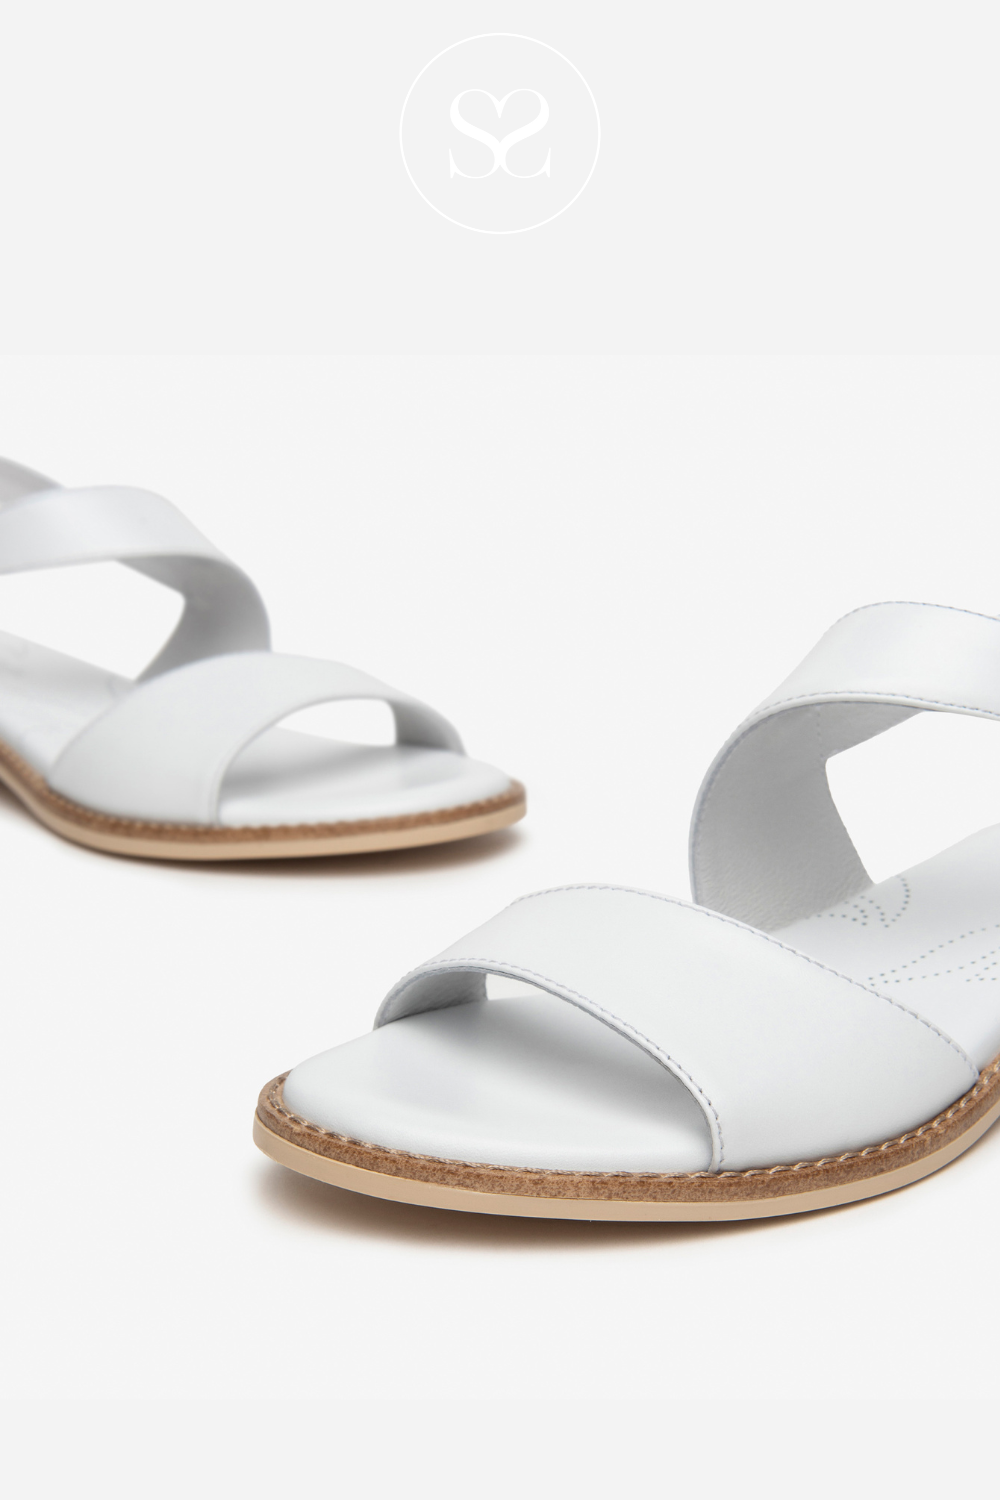 White leather sandals for Women from NeroGiardini